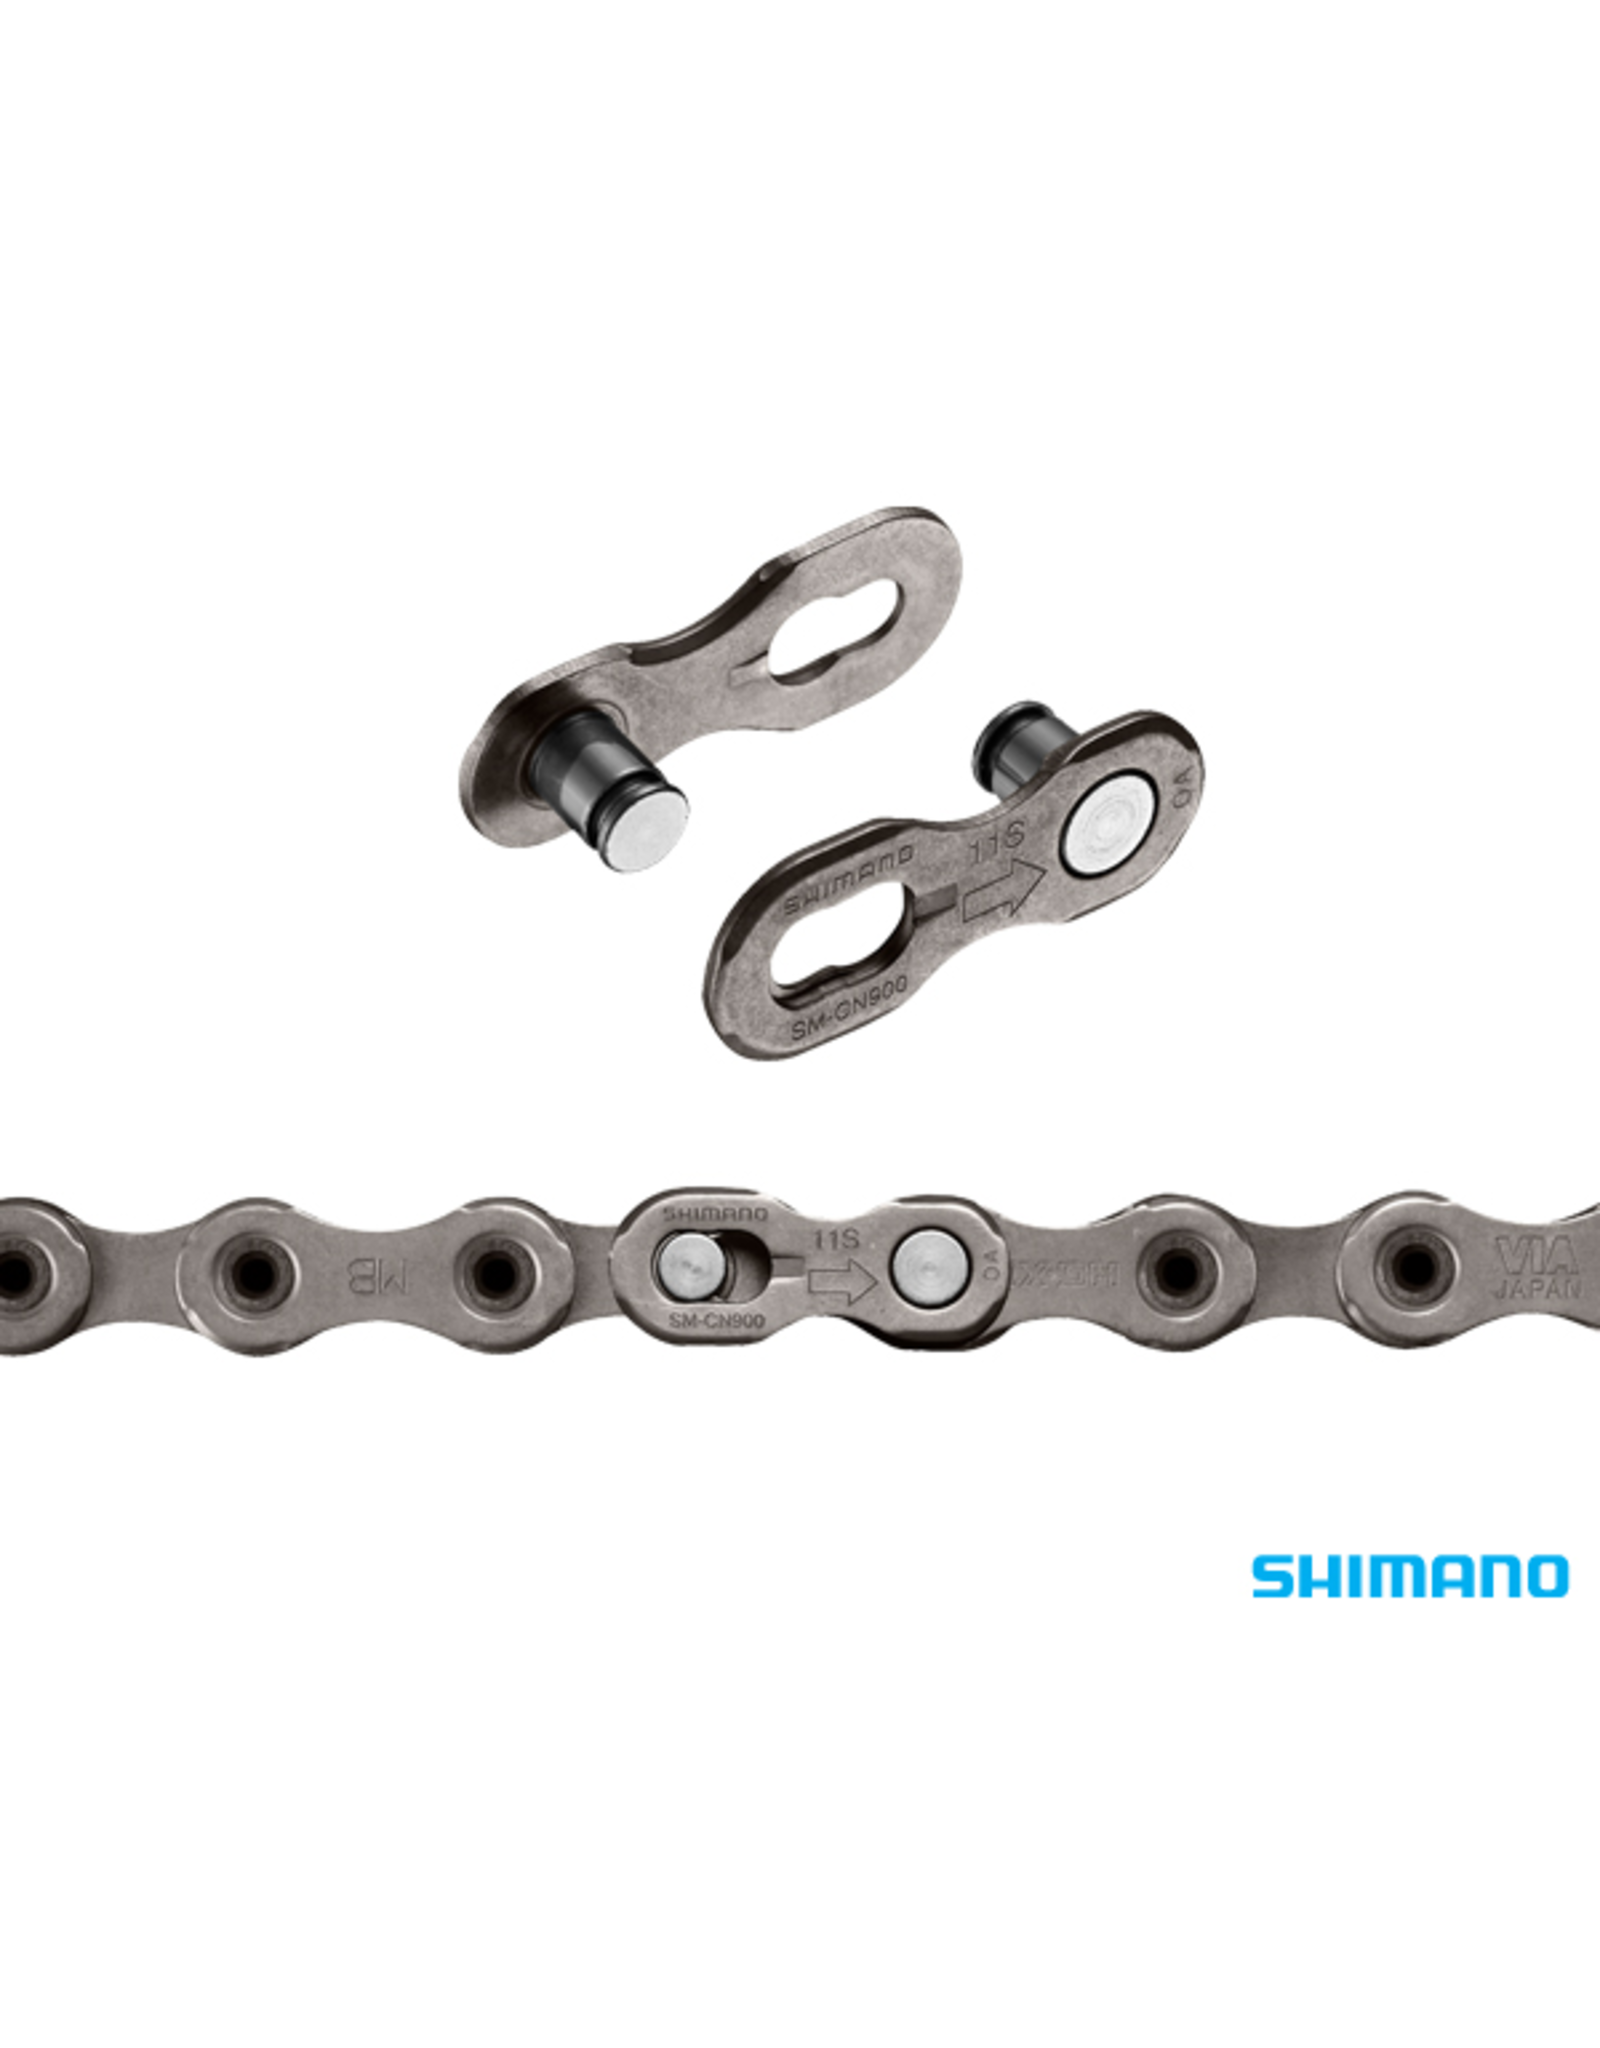 Shimano SHIMANO SM-CN900 CHAIN QUICK LINK FOR 11 SPEED 2 PER BOX